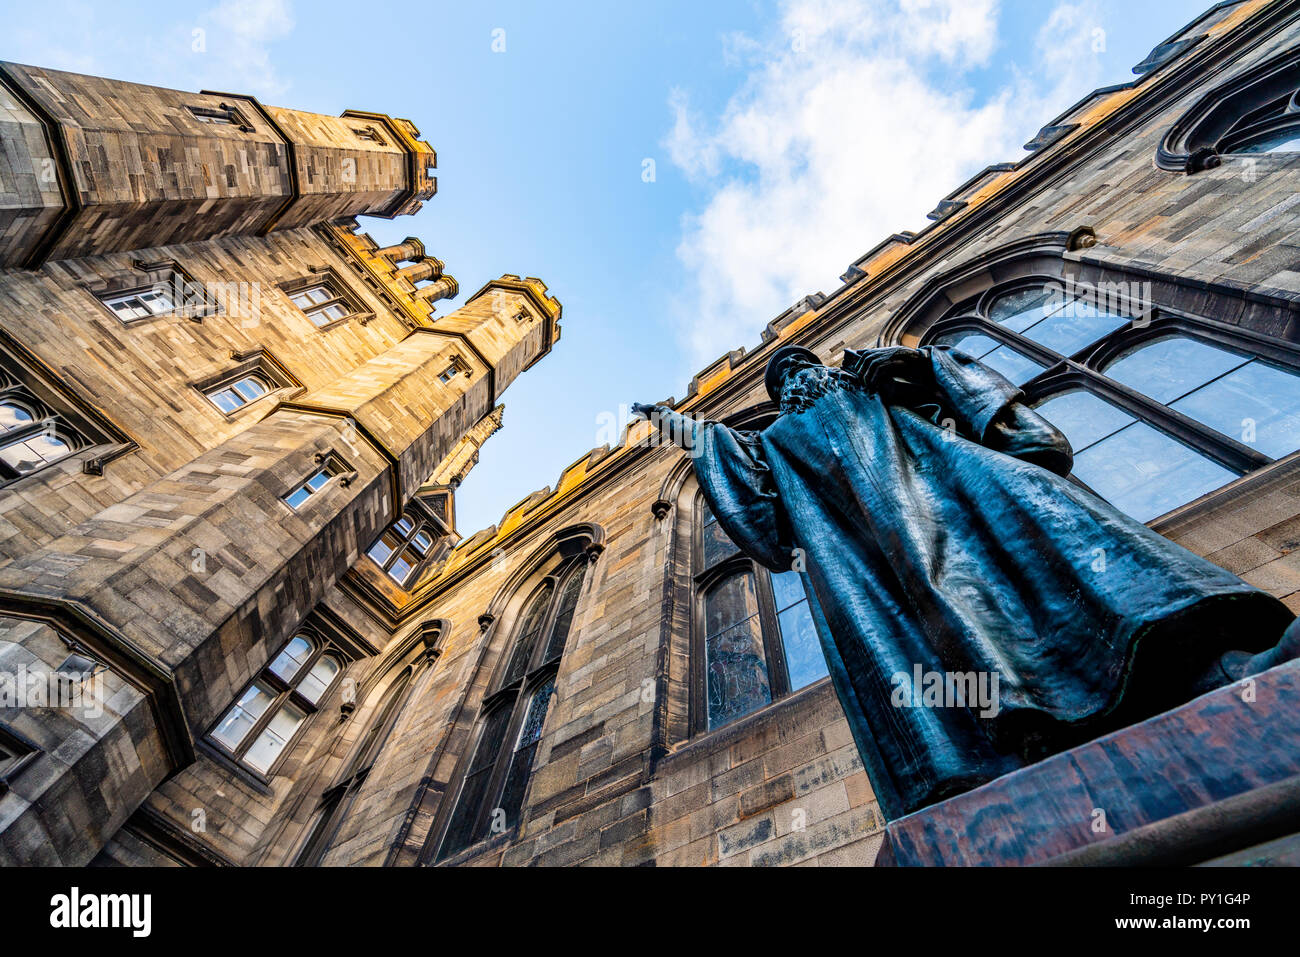 Statue of John Knox in courtyard of New College at the University of Edinburgh, the Faculty of Divinity, on The Mound in Edinburgh Old Town, Scotland, Stock Photo